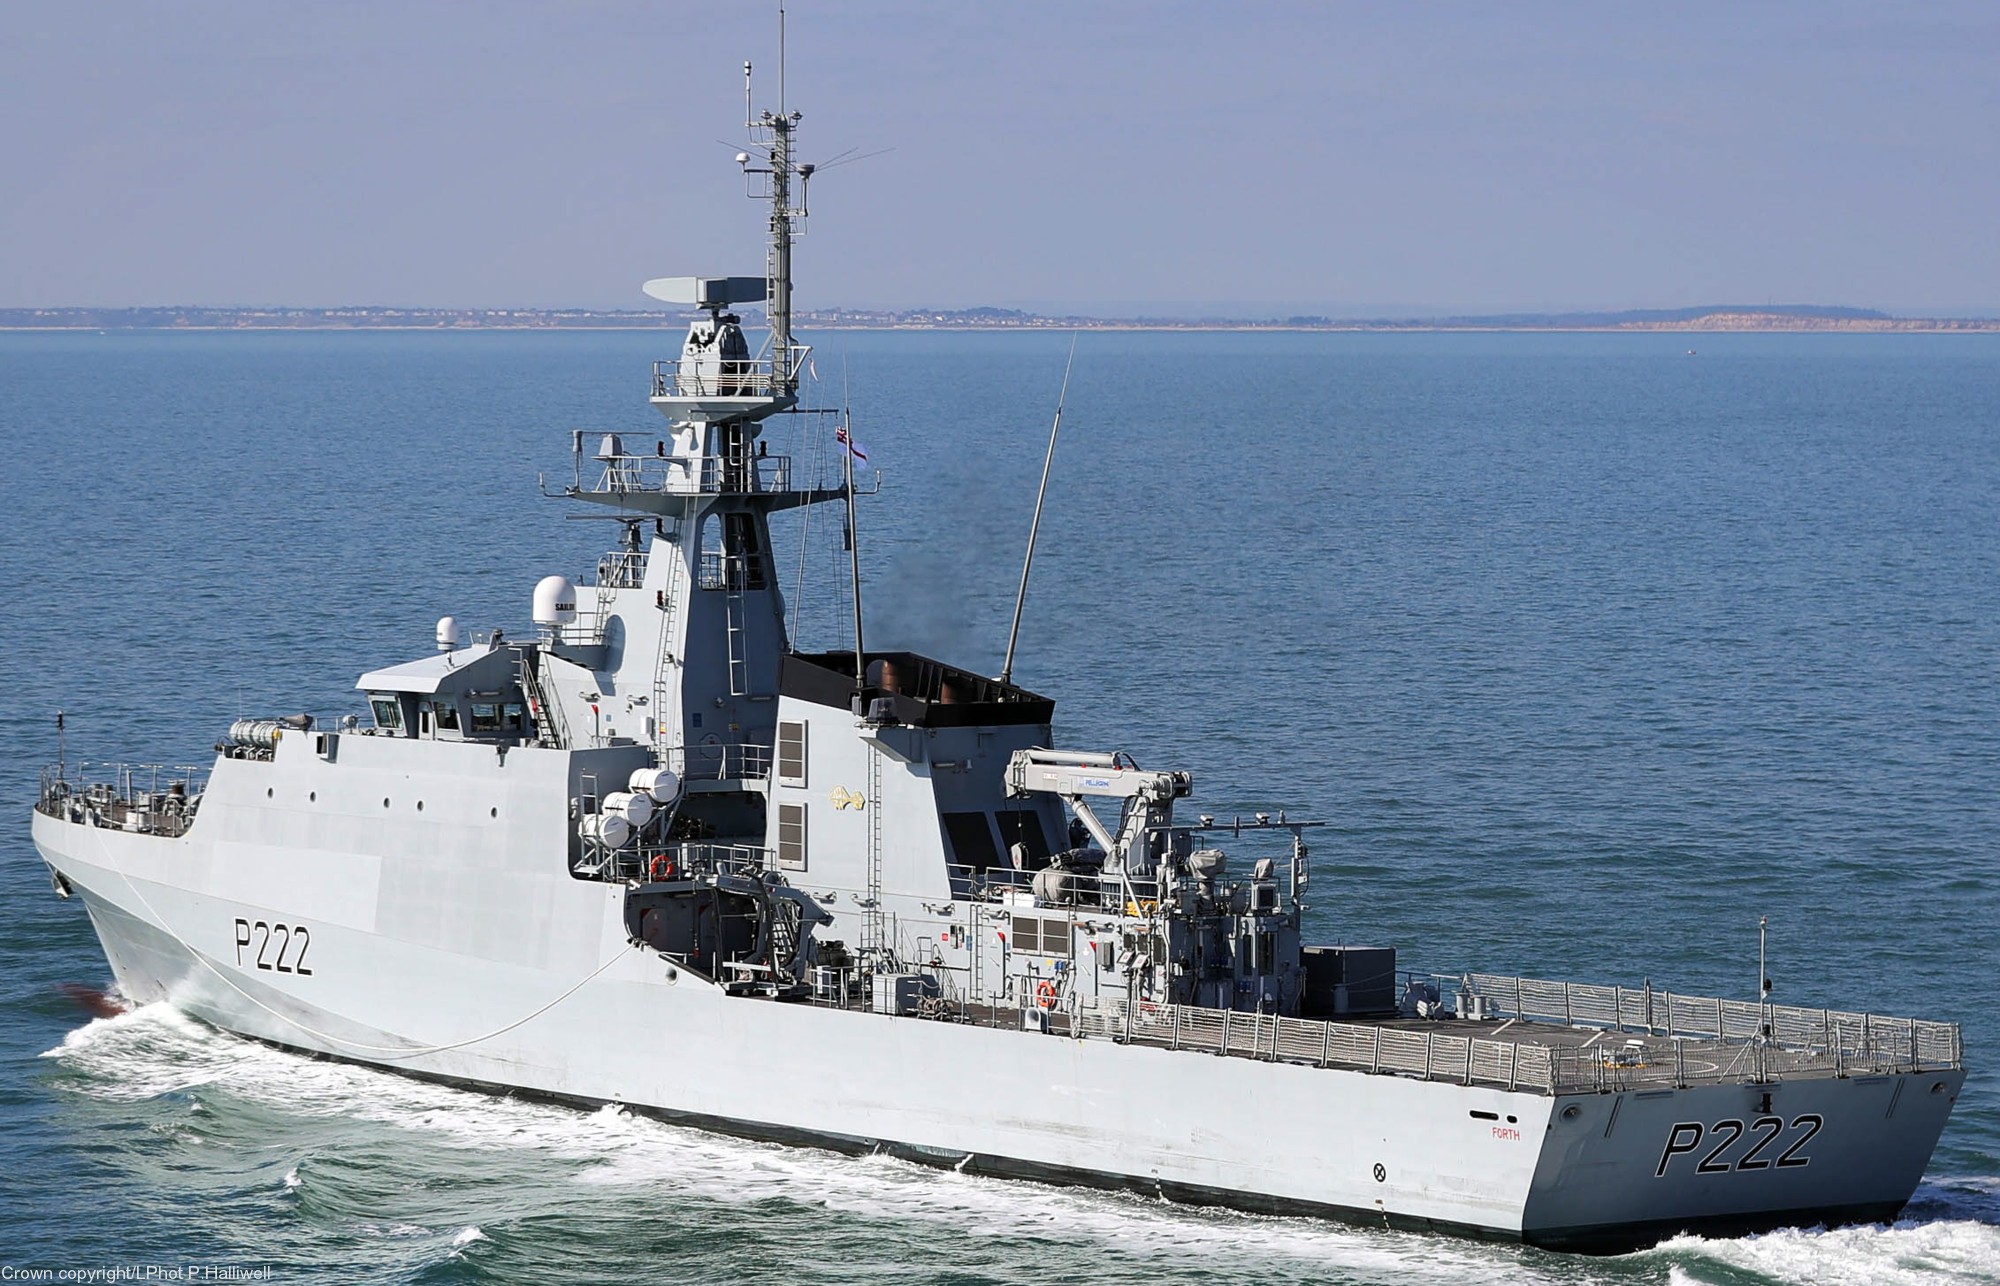 p222 hms forth river class offshore patrol vessel opv royal navy 51